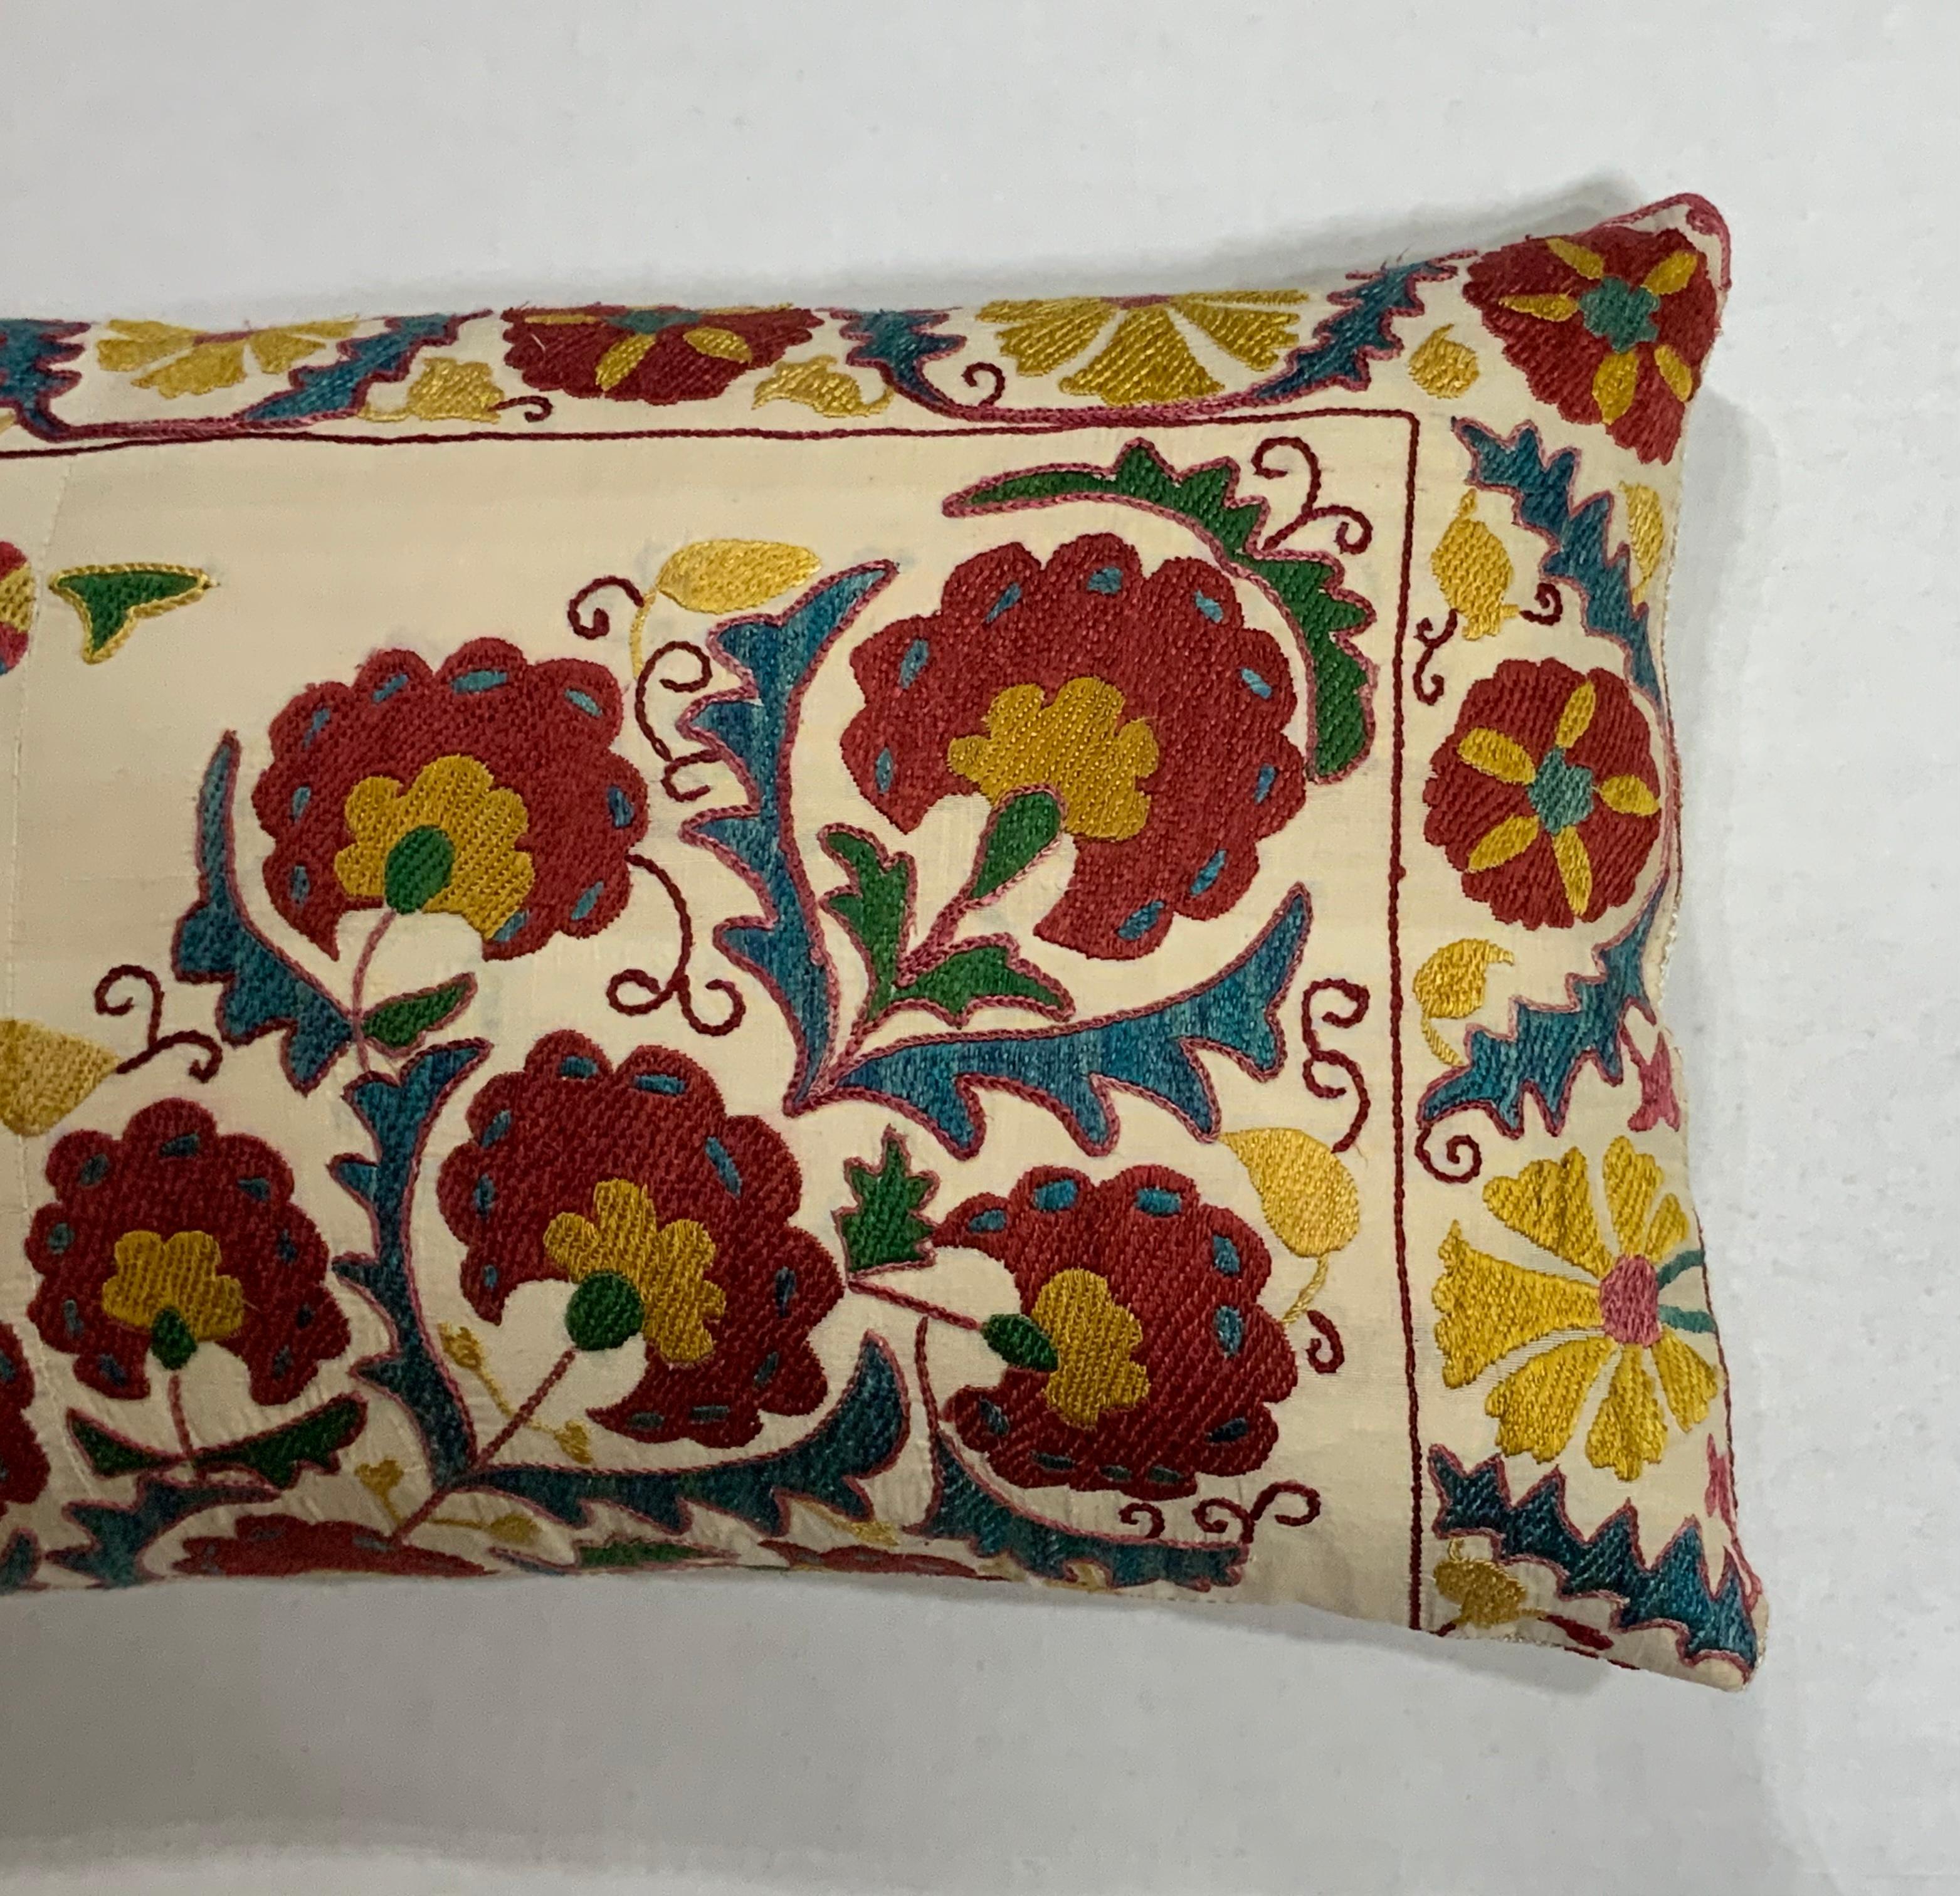 Beautiful pillow made of hand embroidery silk, on cream color background, exceptional flowers and vine motifs all around, cotton backing, fresh new insert.